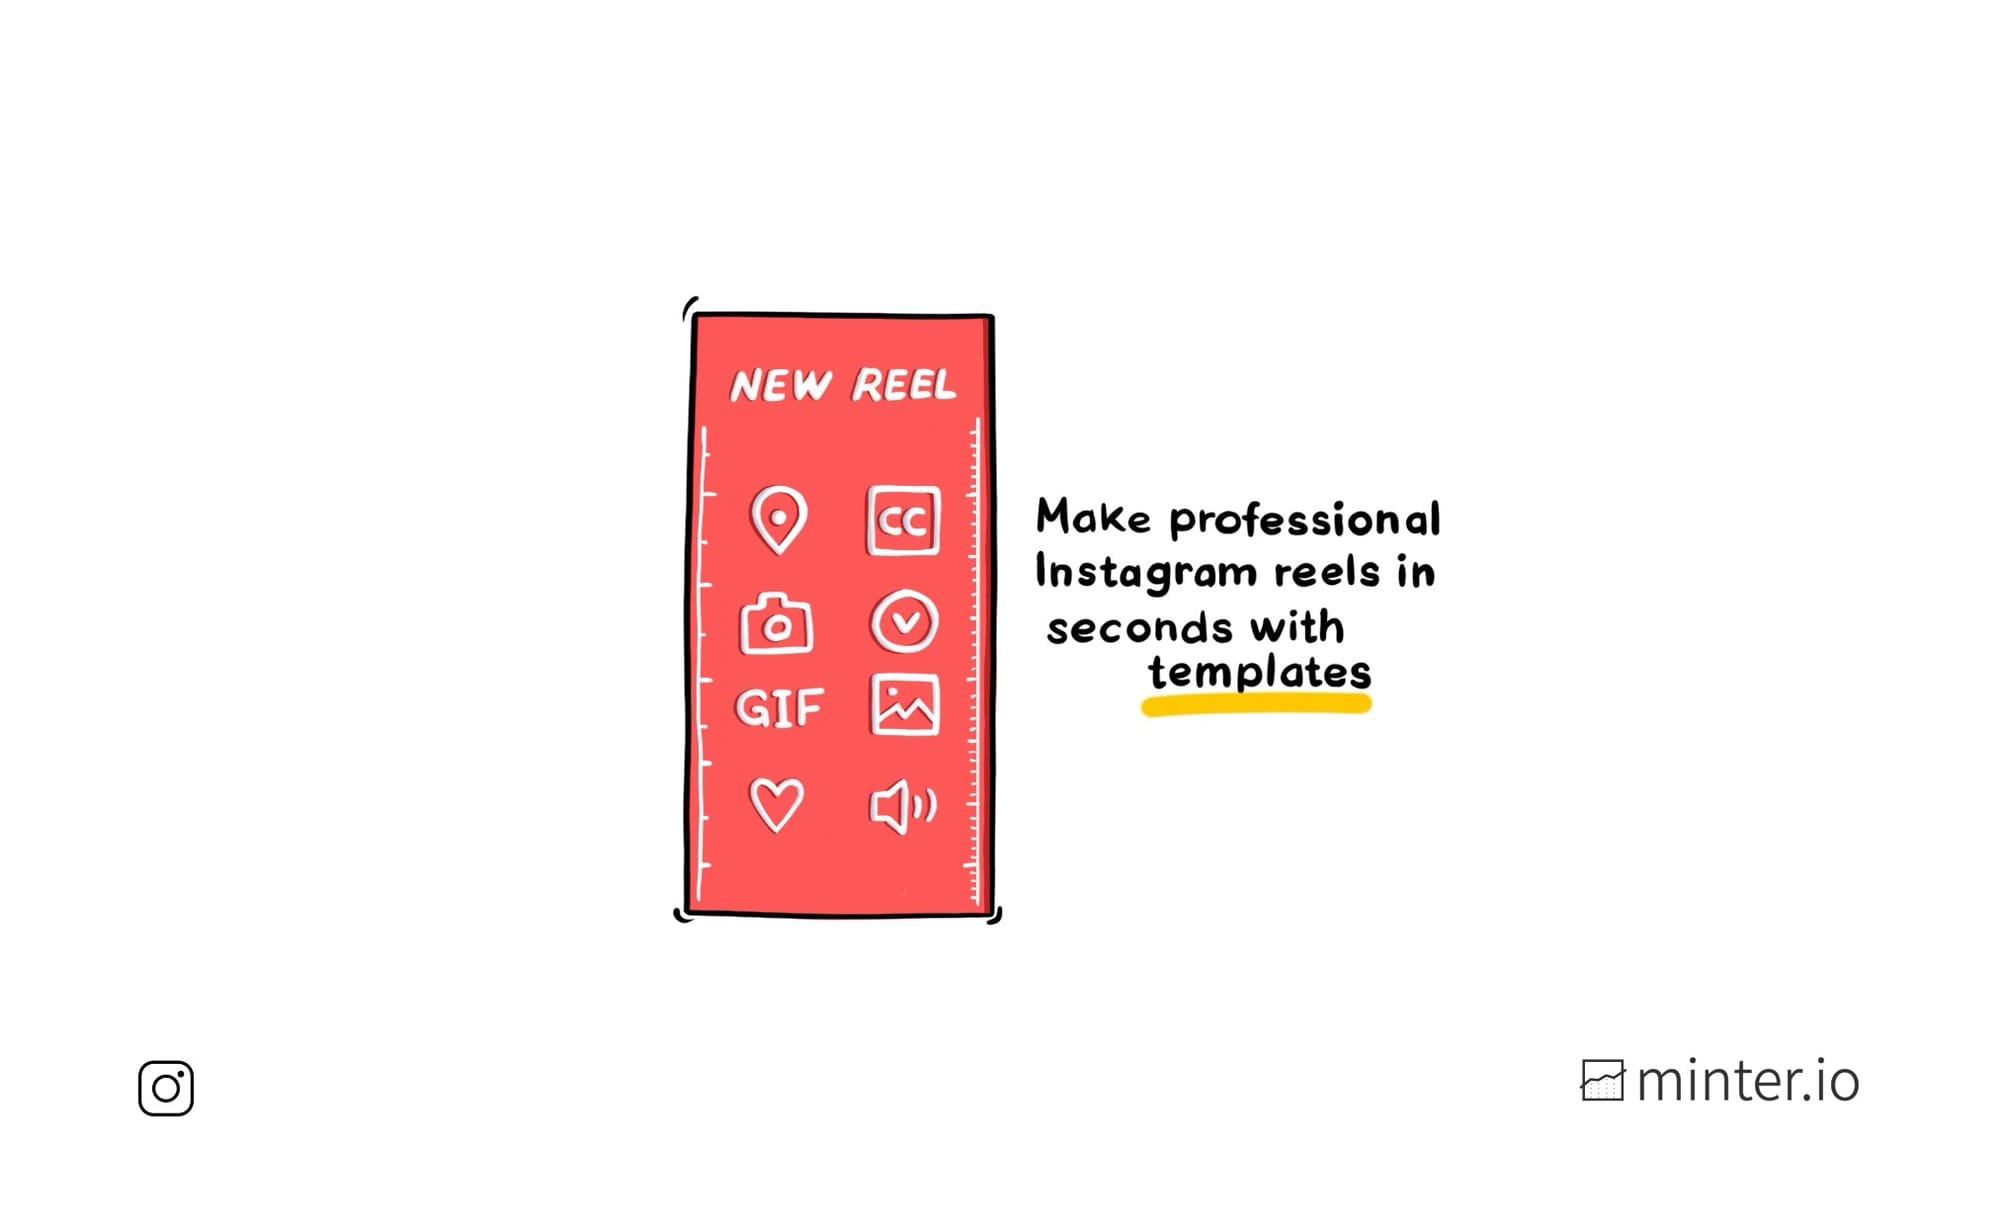 Make professional Instagram reels in seconds with templates